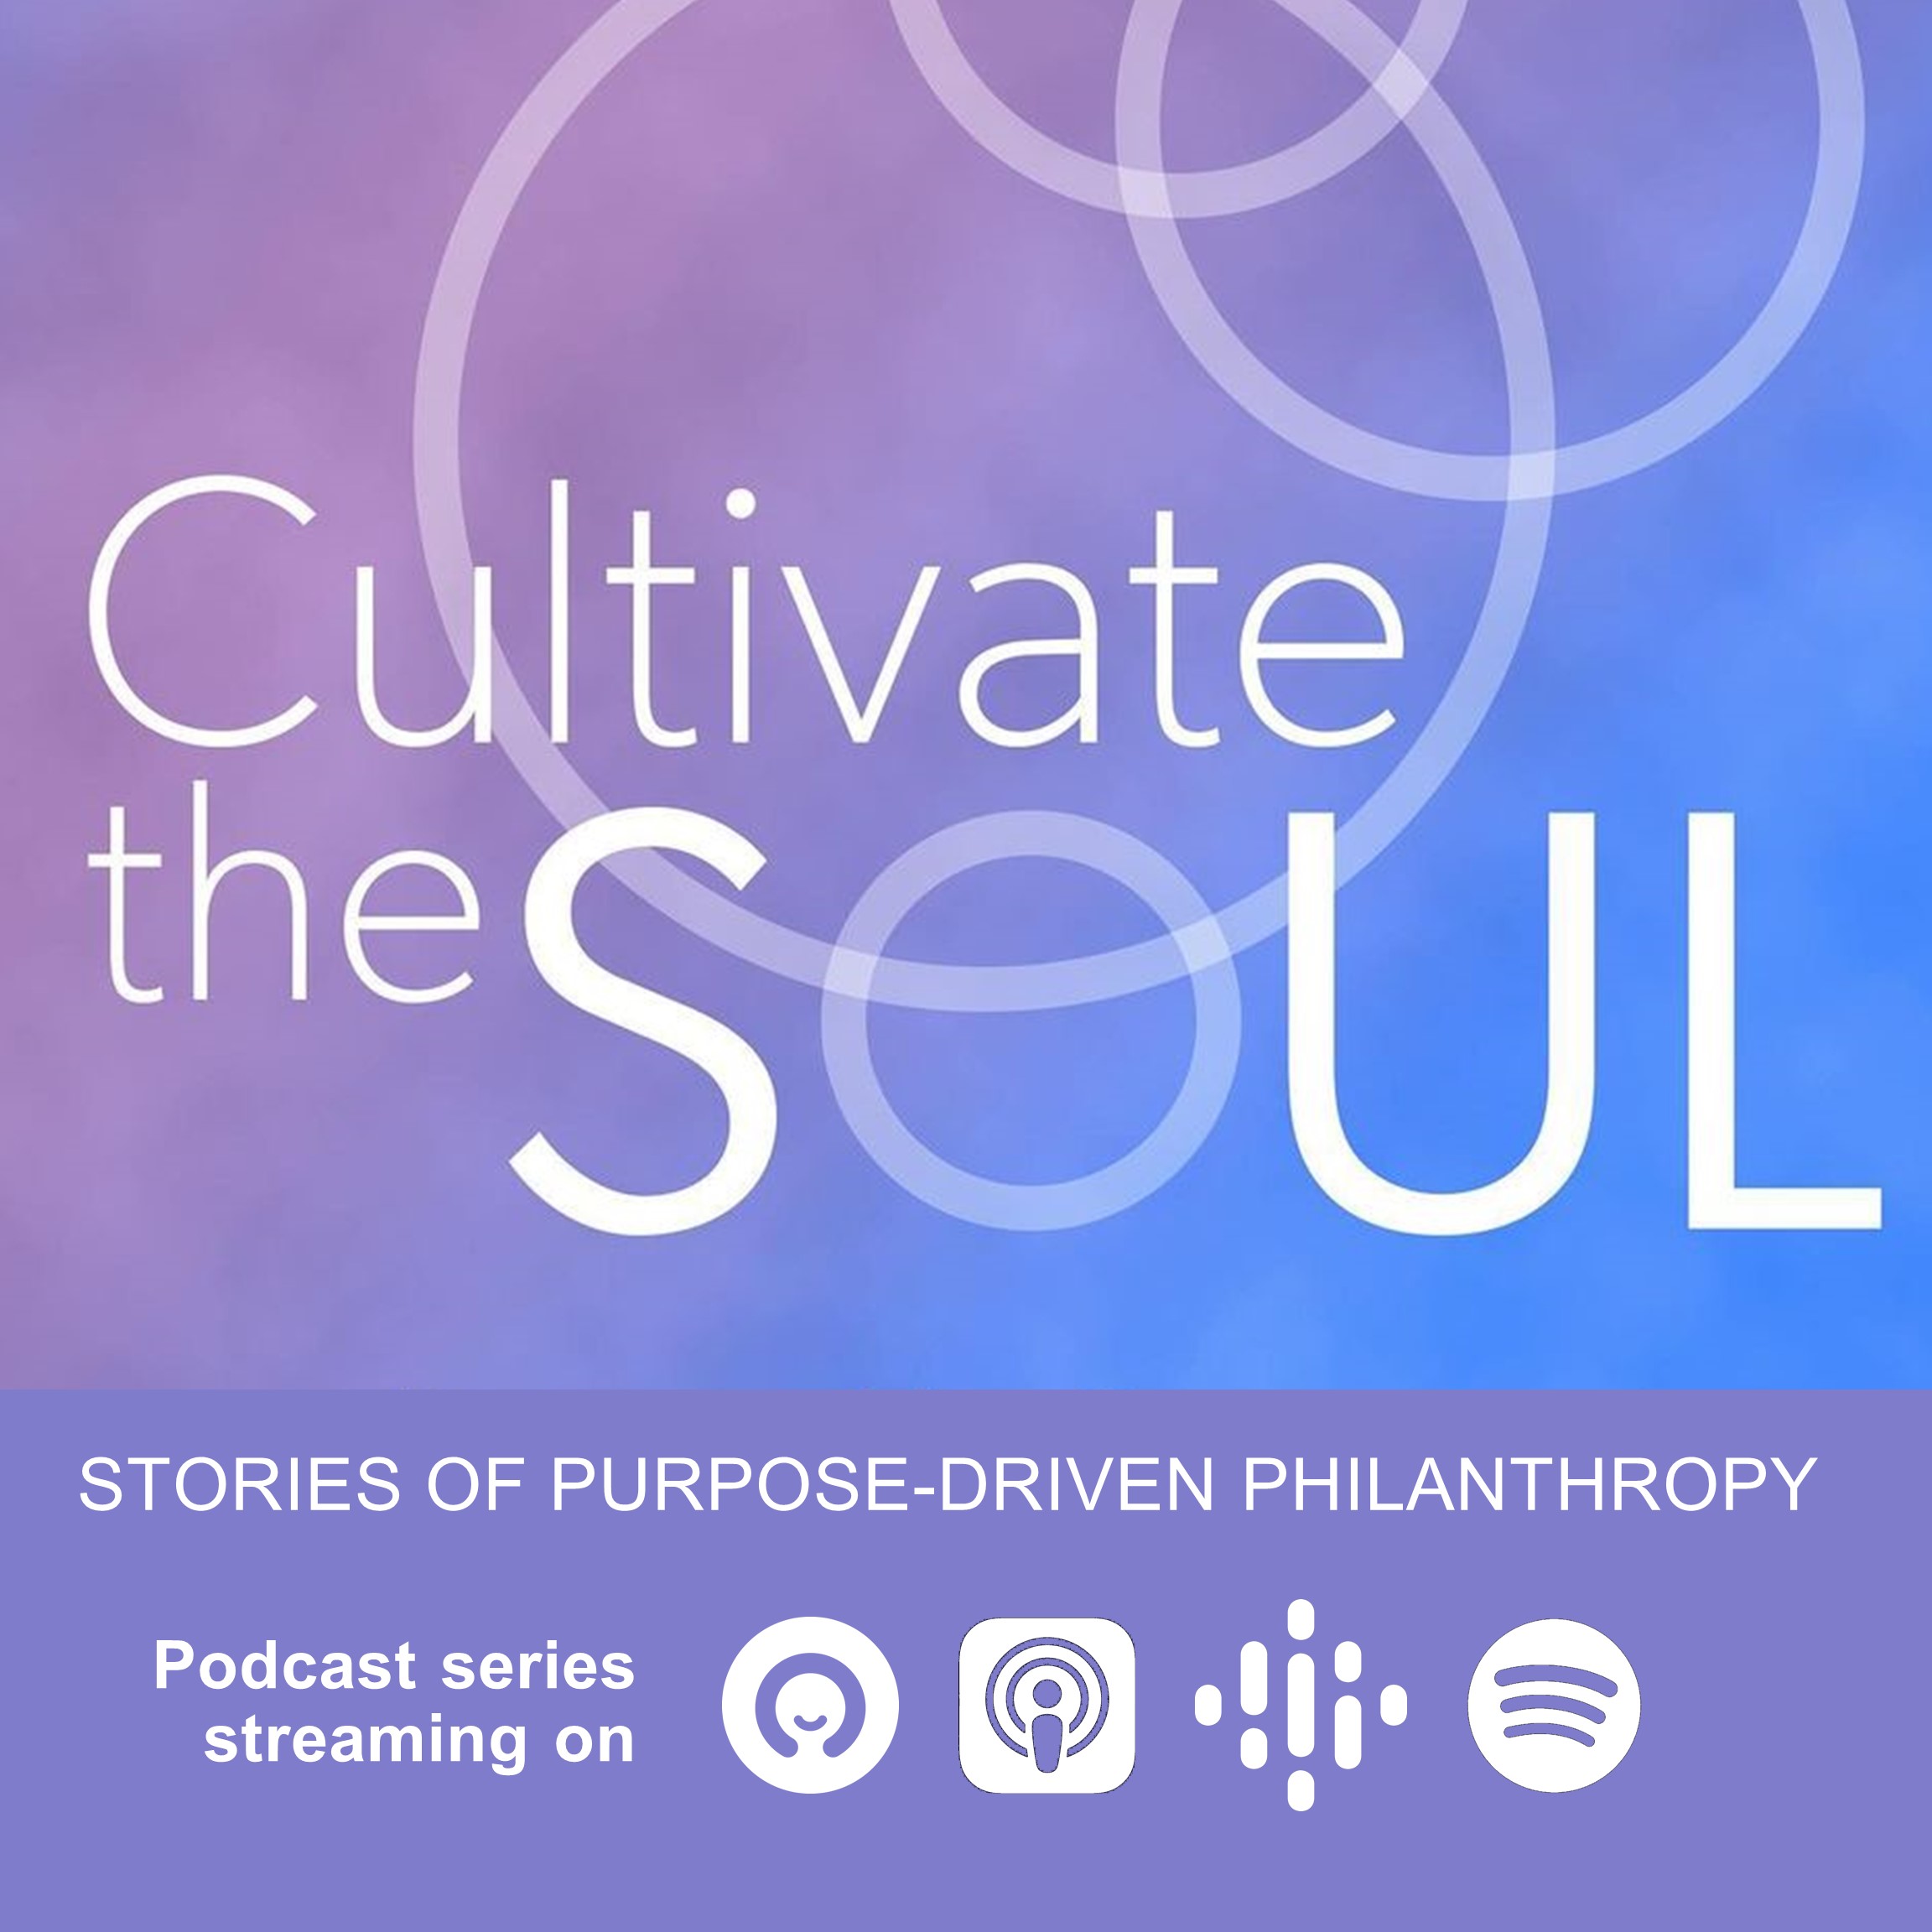 CULTIVATE THE SOUL - Stories of Purpose-Driven Philanthropy - Podcast streaming on omny.fm, Apple Podcasts, Google Podcasts, Spotify